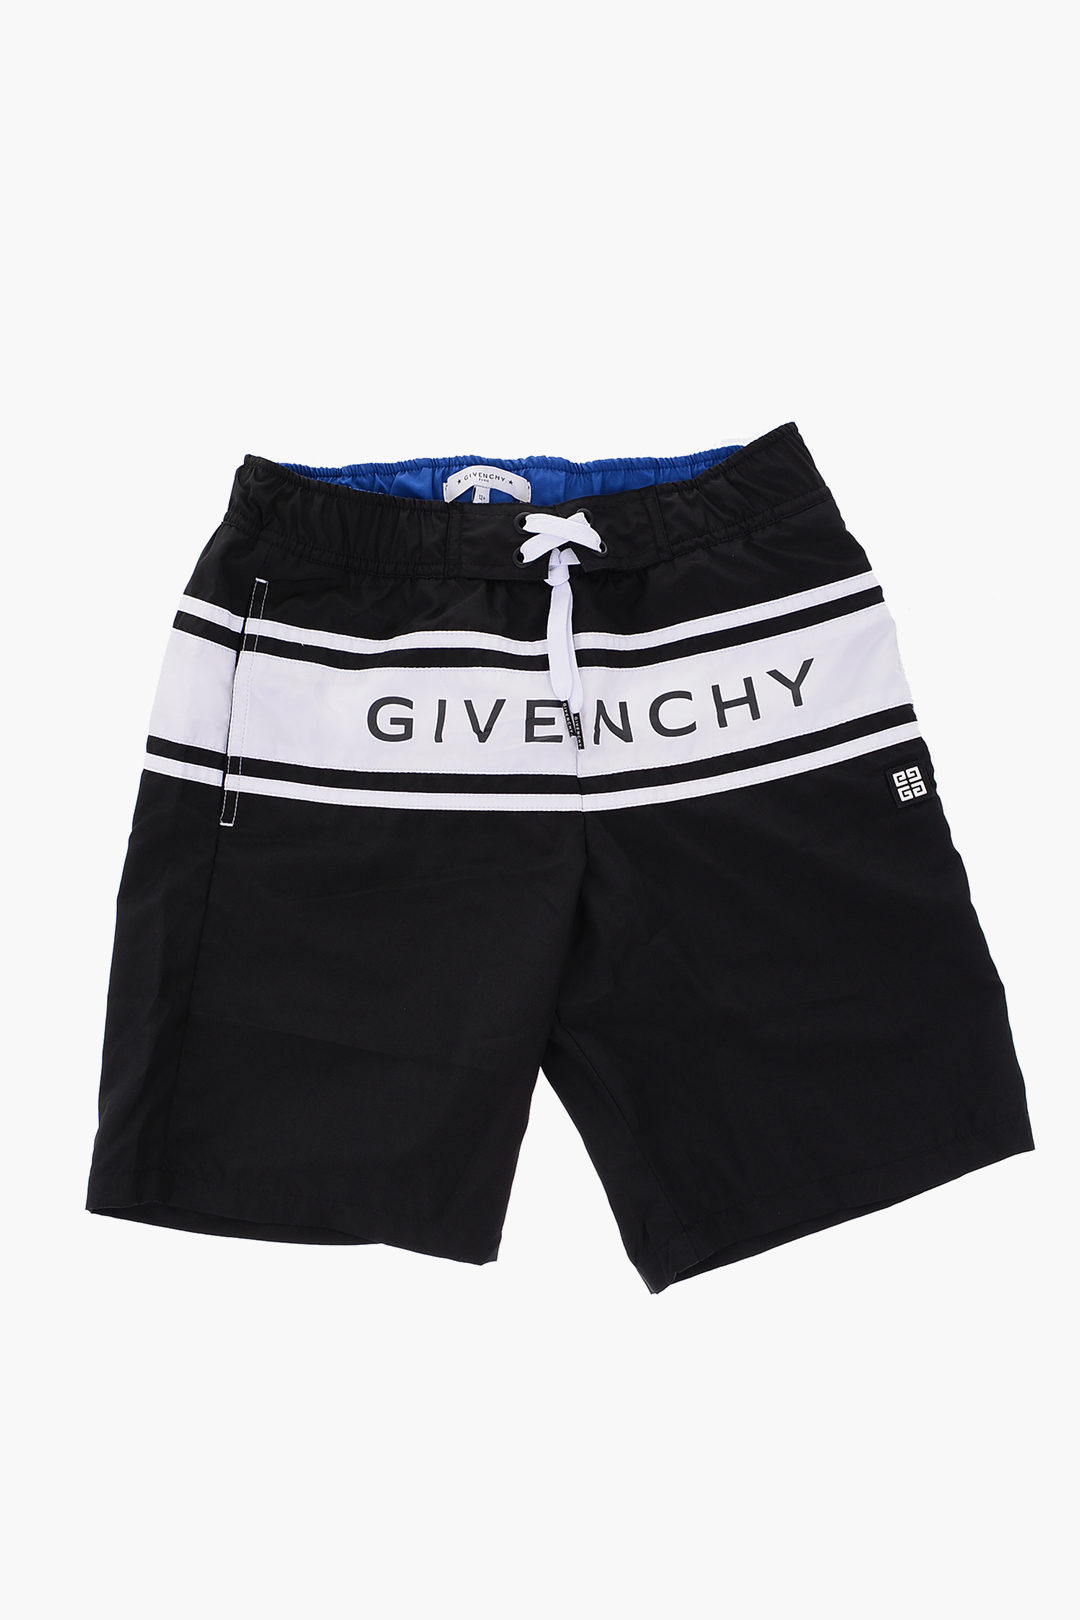 Givenchy KIDS Drawstring Boxer swimsuit boys - Glamood Outlet